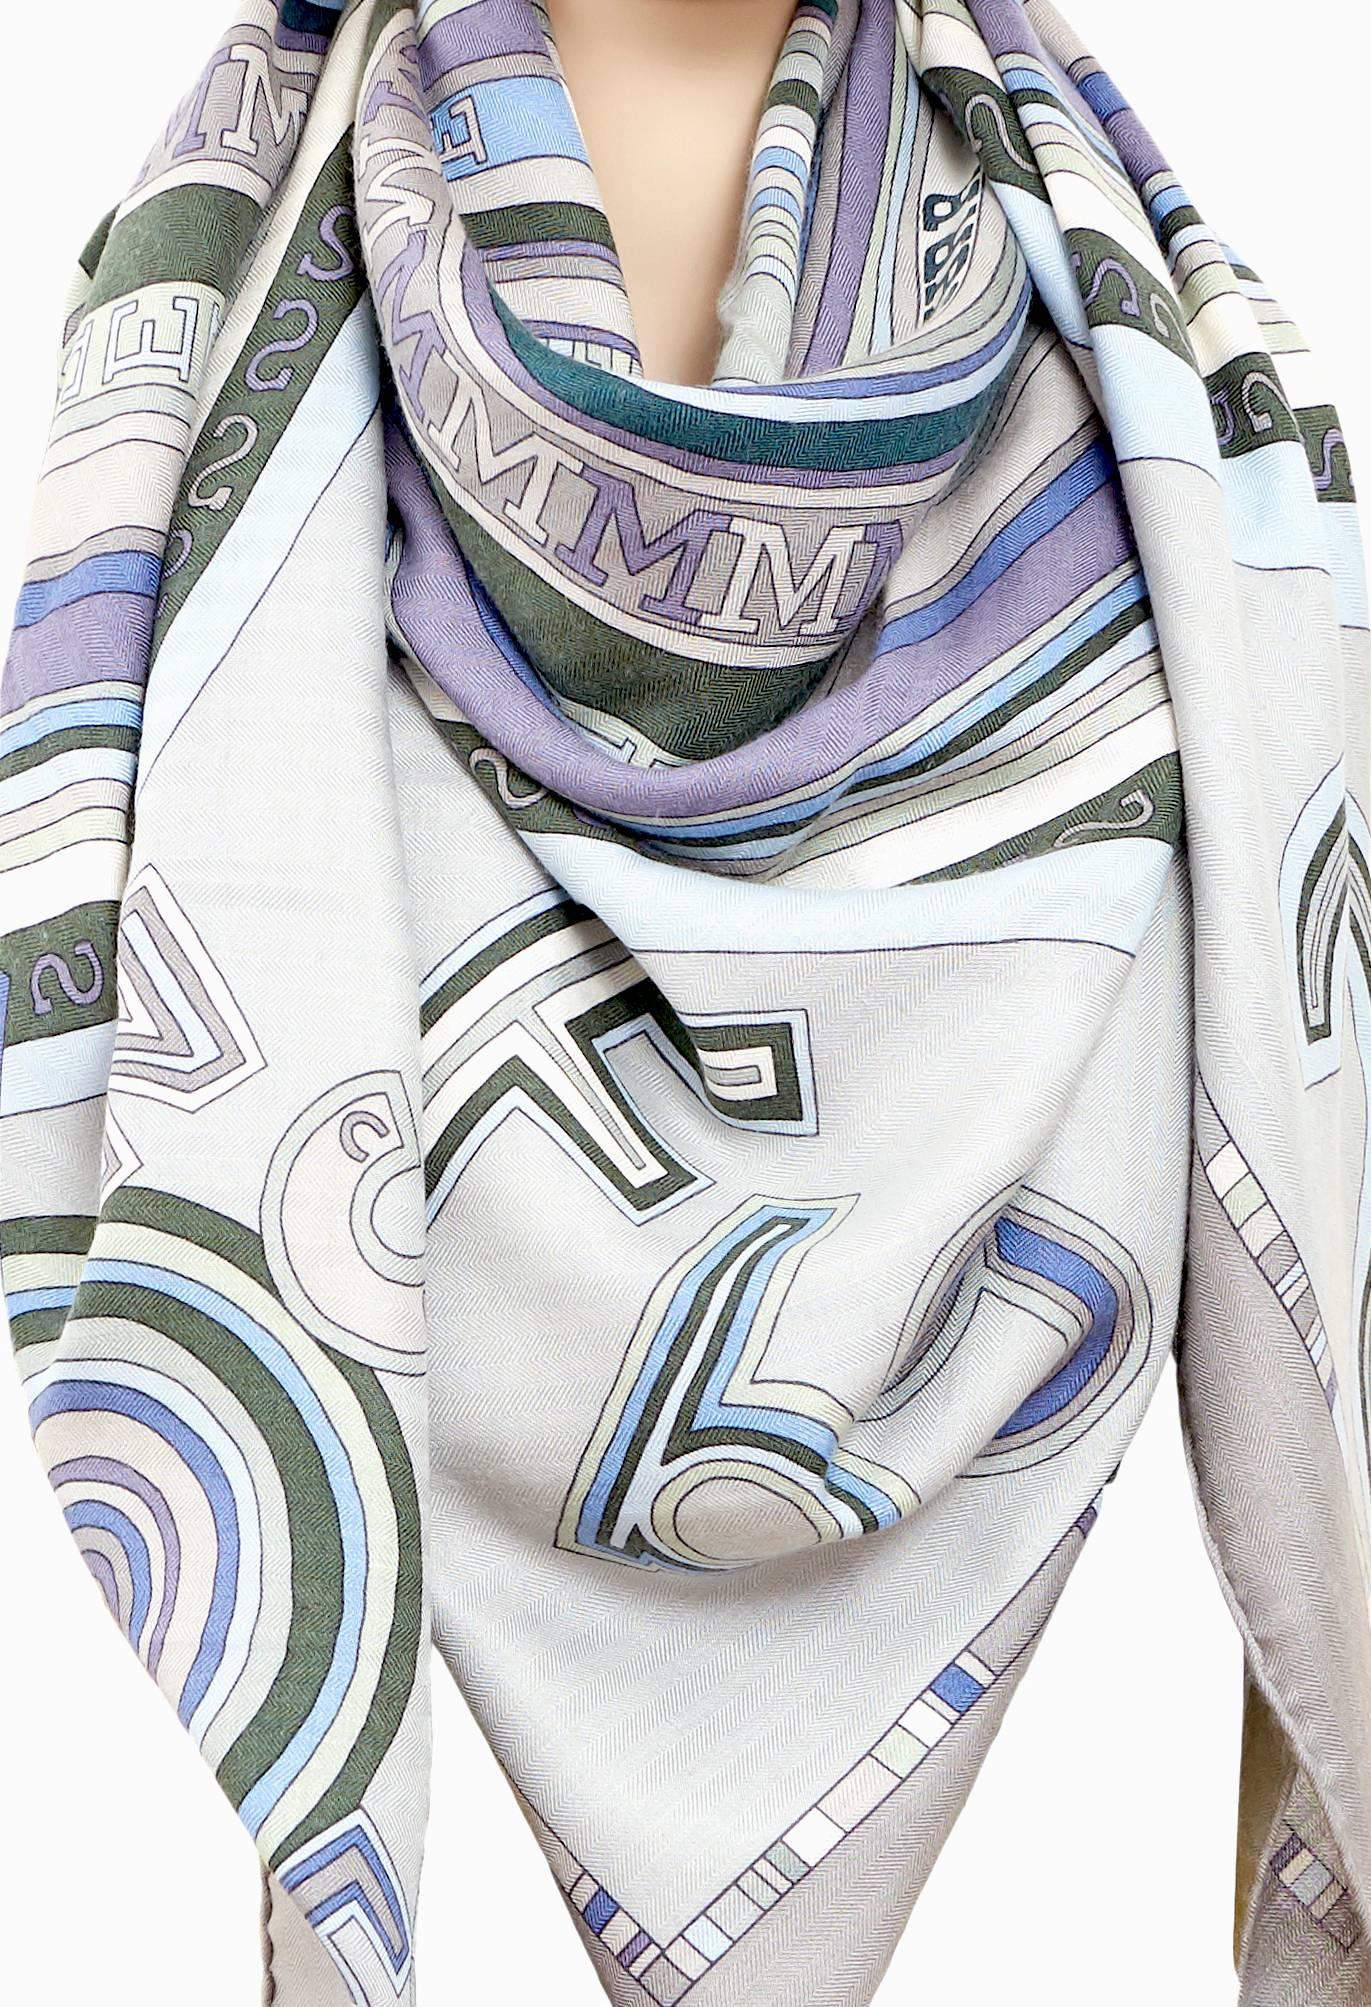 Hermes Tohu Bohu Grey Blue Natural Cashmere Silk Shawl Scarf GM Grail!
Grail!  New or Never Worn. 
Pristine Condition with no flaws or issues to declare.
Pefect gift! Comes with Hermes ribbon and box. 
This grail shawl designed by Stuhlhofer-Maier